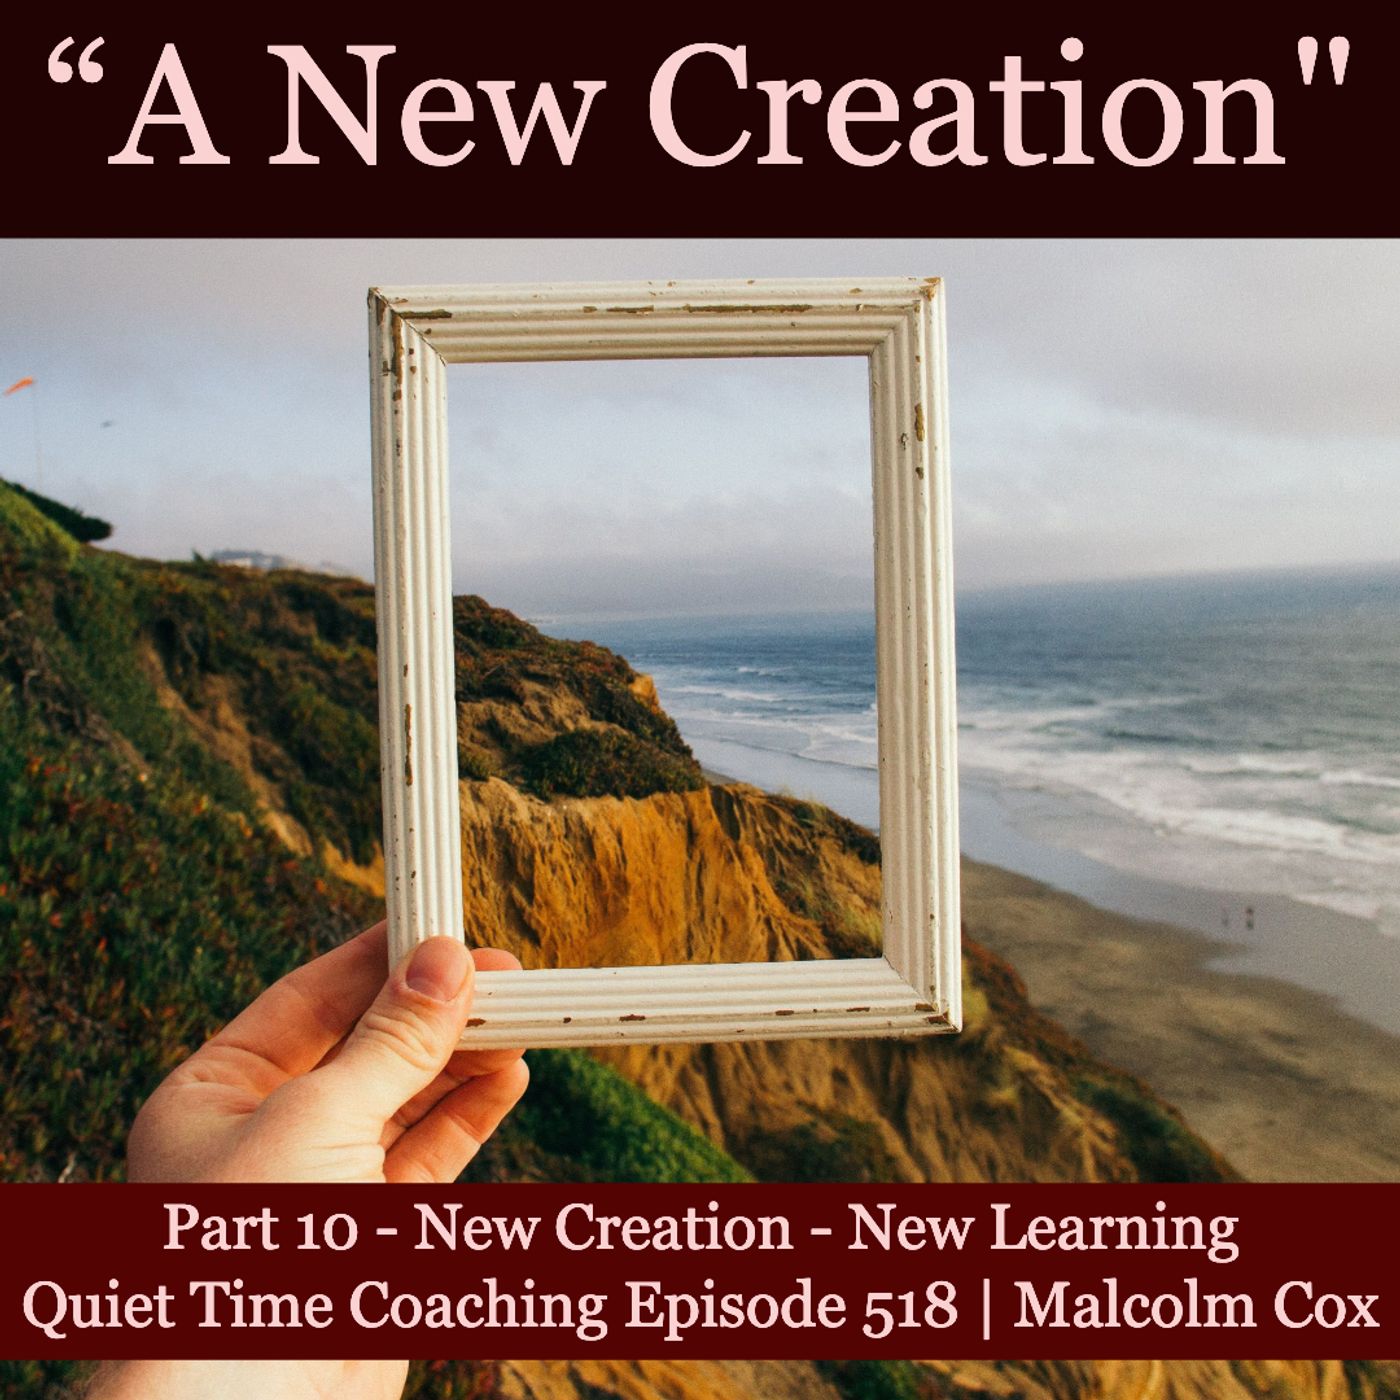 S2 Ep2195: Quiet Time Coaching Episode 518 | New Creation Series — Part 10 | “New Creation - New Learning” | Malcolm Cox